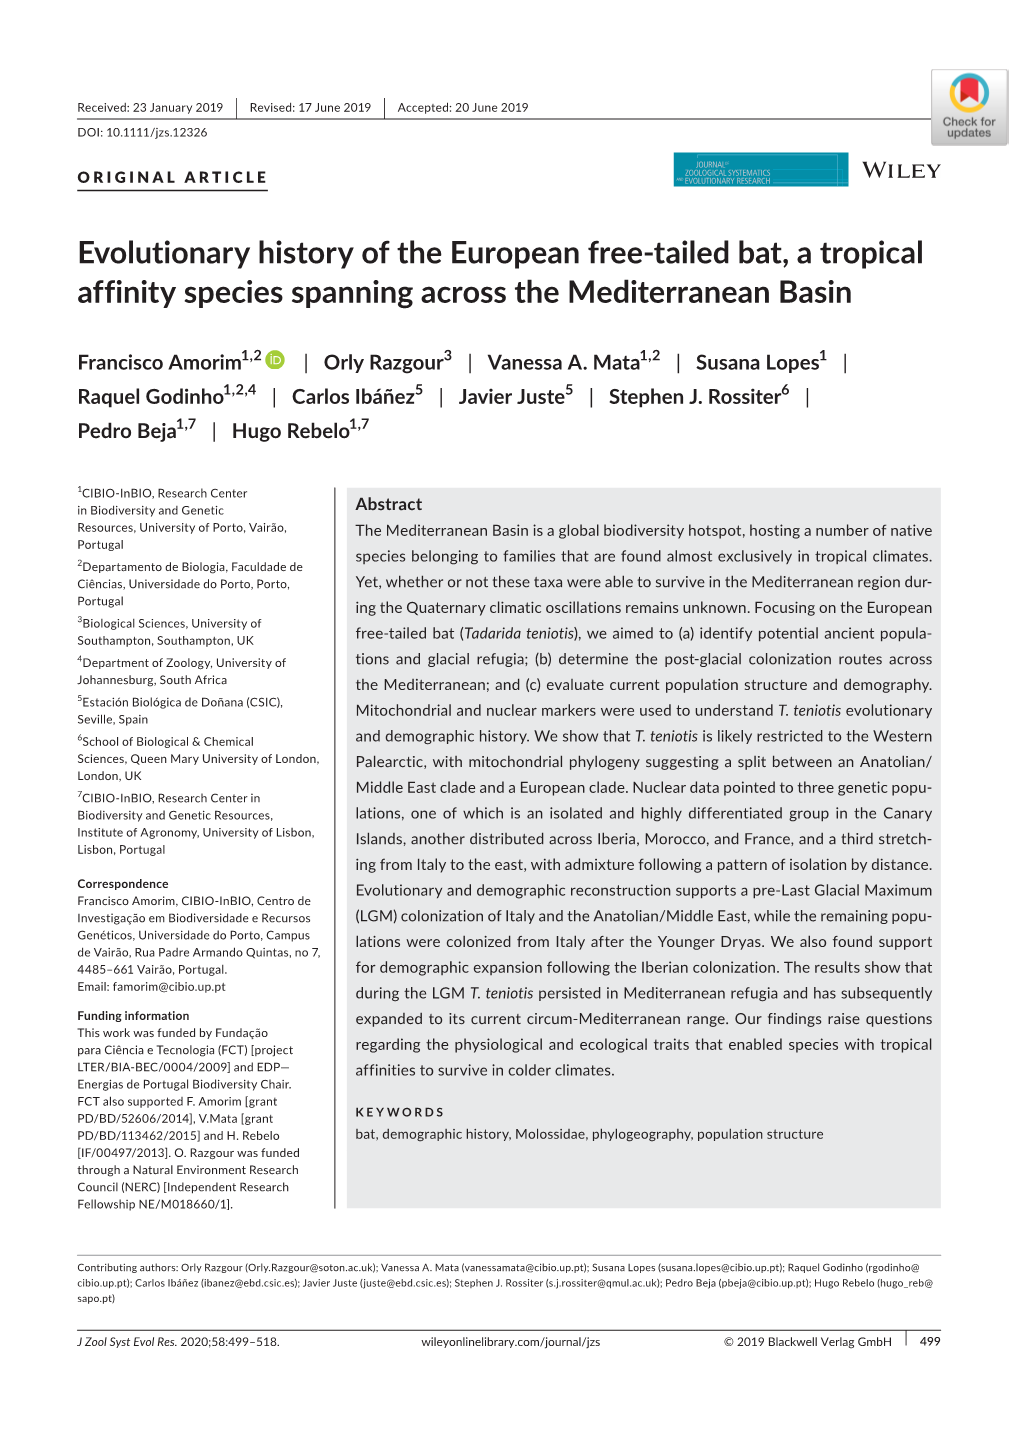 Evolutionary History of the European Free-Tailed Bat, a Tropical Affinity Species Spanning Across the Mediterranean Basin